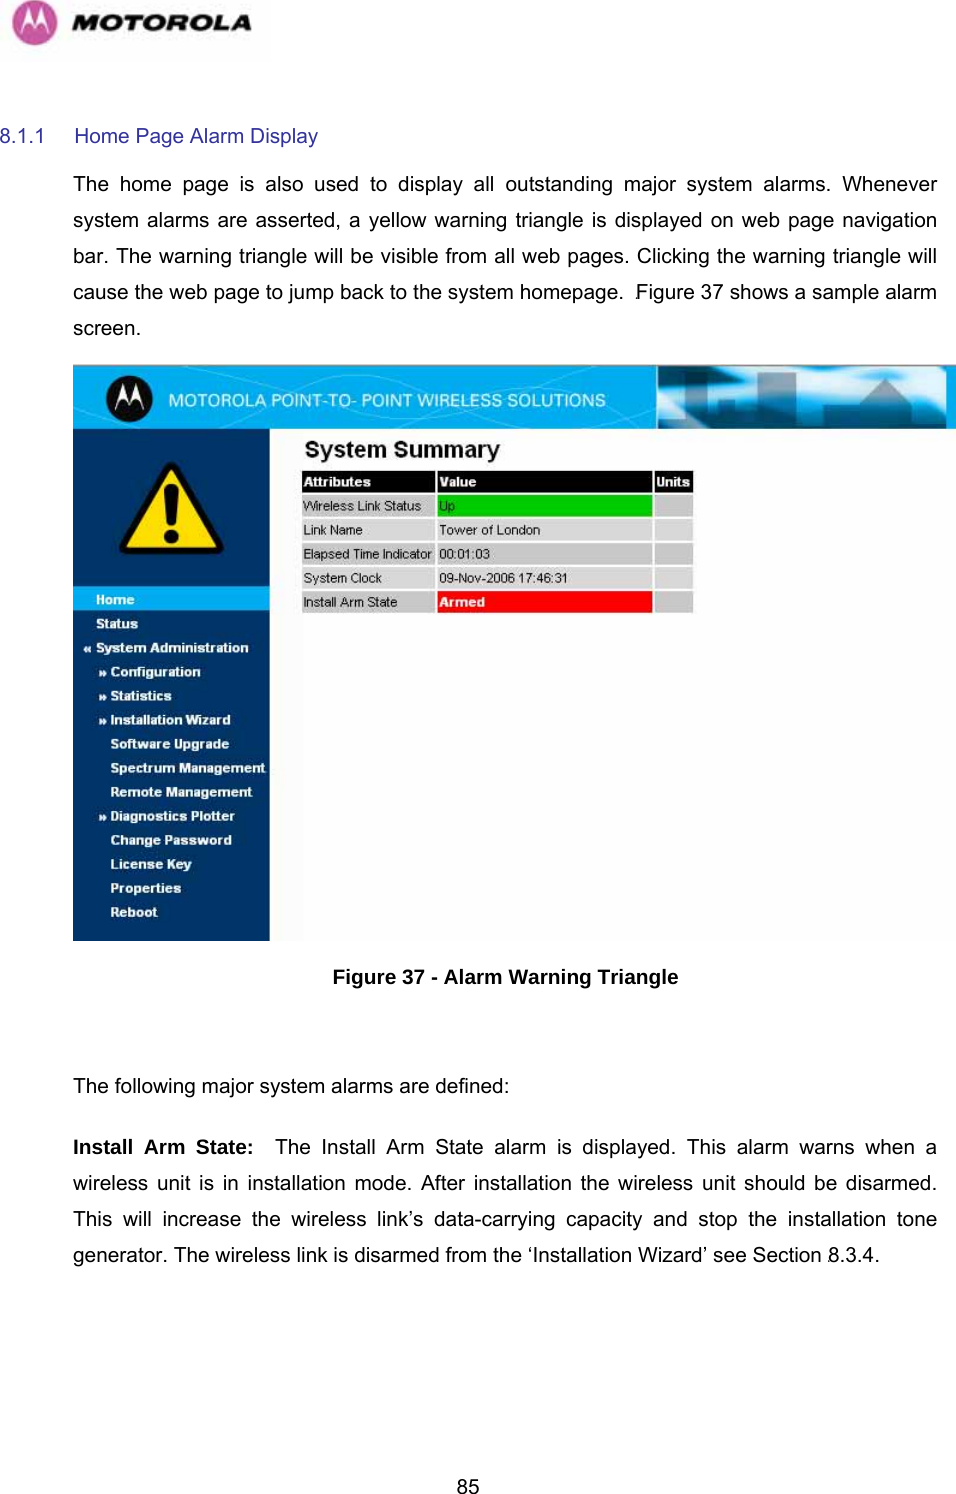   858.1.1  Home Page Alarm Display The home page is also used to display all outstanding major system alarms. Whenever system alarms are asserted, a yellow warning triangle is displayed on web page navigation bar. The warning triangle will be visible from all web pages. Clicking the warning triangle will cause the web page to jump back to the system homepage.  1046HFigure 37 shows a sample alarm screen.  Figure 37 - Alarm Warning Triangle  The following major system alarms are defined:  Install Arm State:  The Install Arm State alarm is displayed. This alarm warns when a wireless unit is in installation mode. After installation the wireless unit should be disarmed. This will increase the wireless link’s data-carrying capacity and stop the installation tone generator. The wireless link is disarmed from the ‘Installation Wizard’ see Section 1047H8.3.4. 